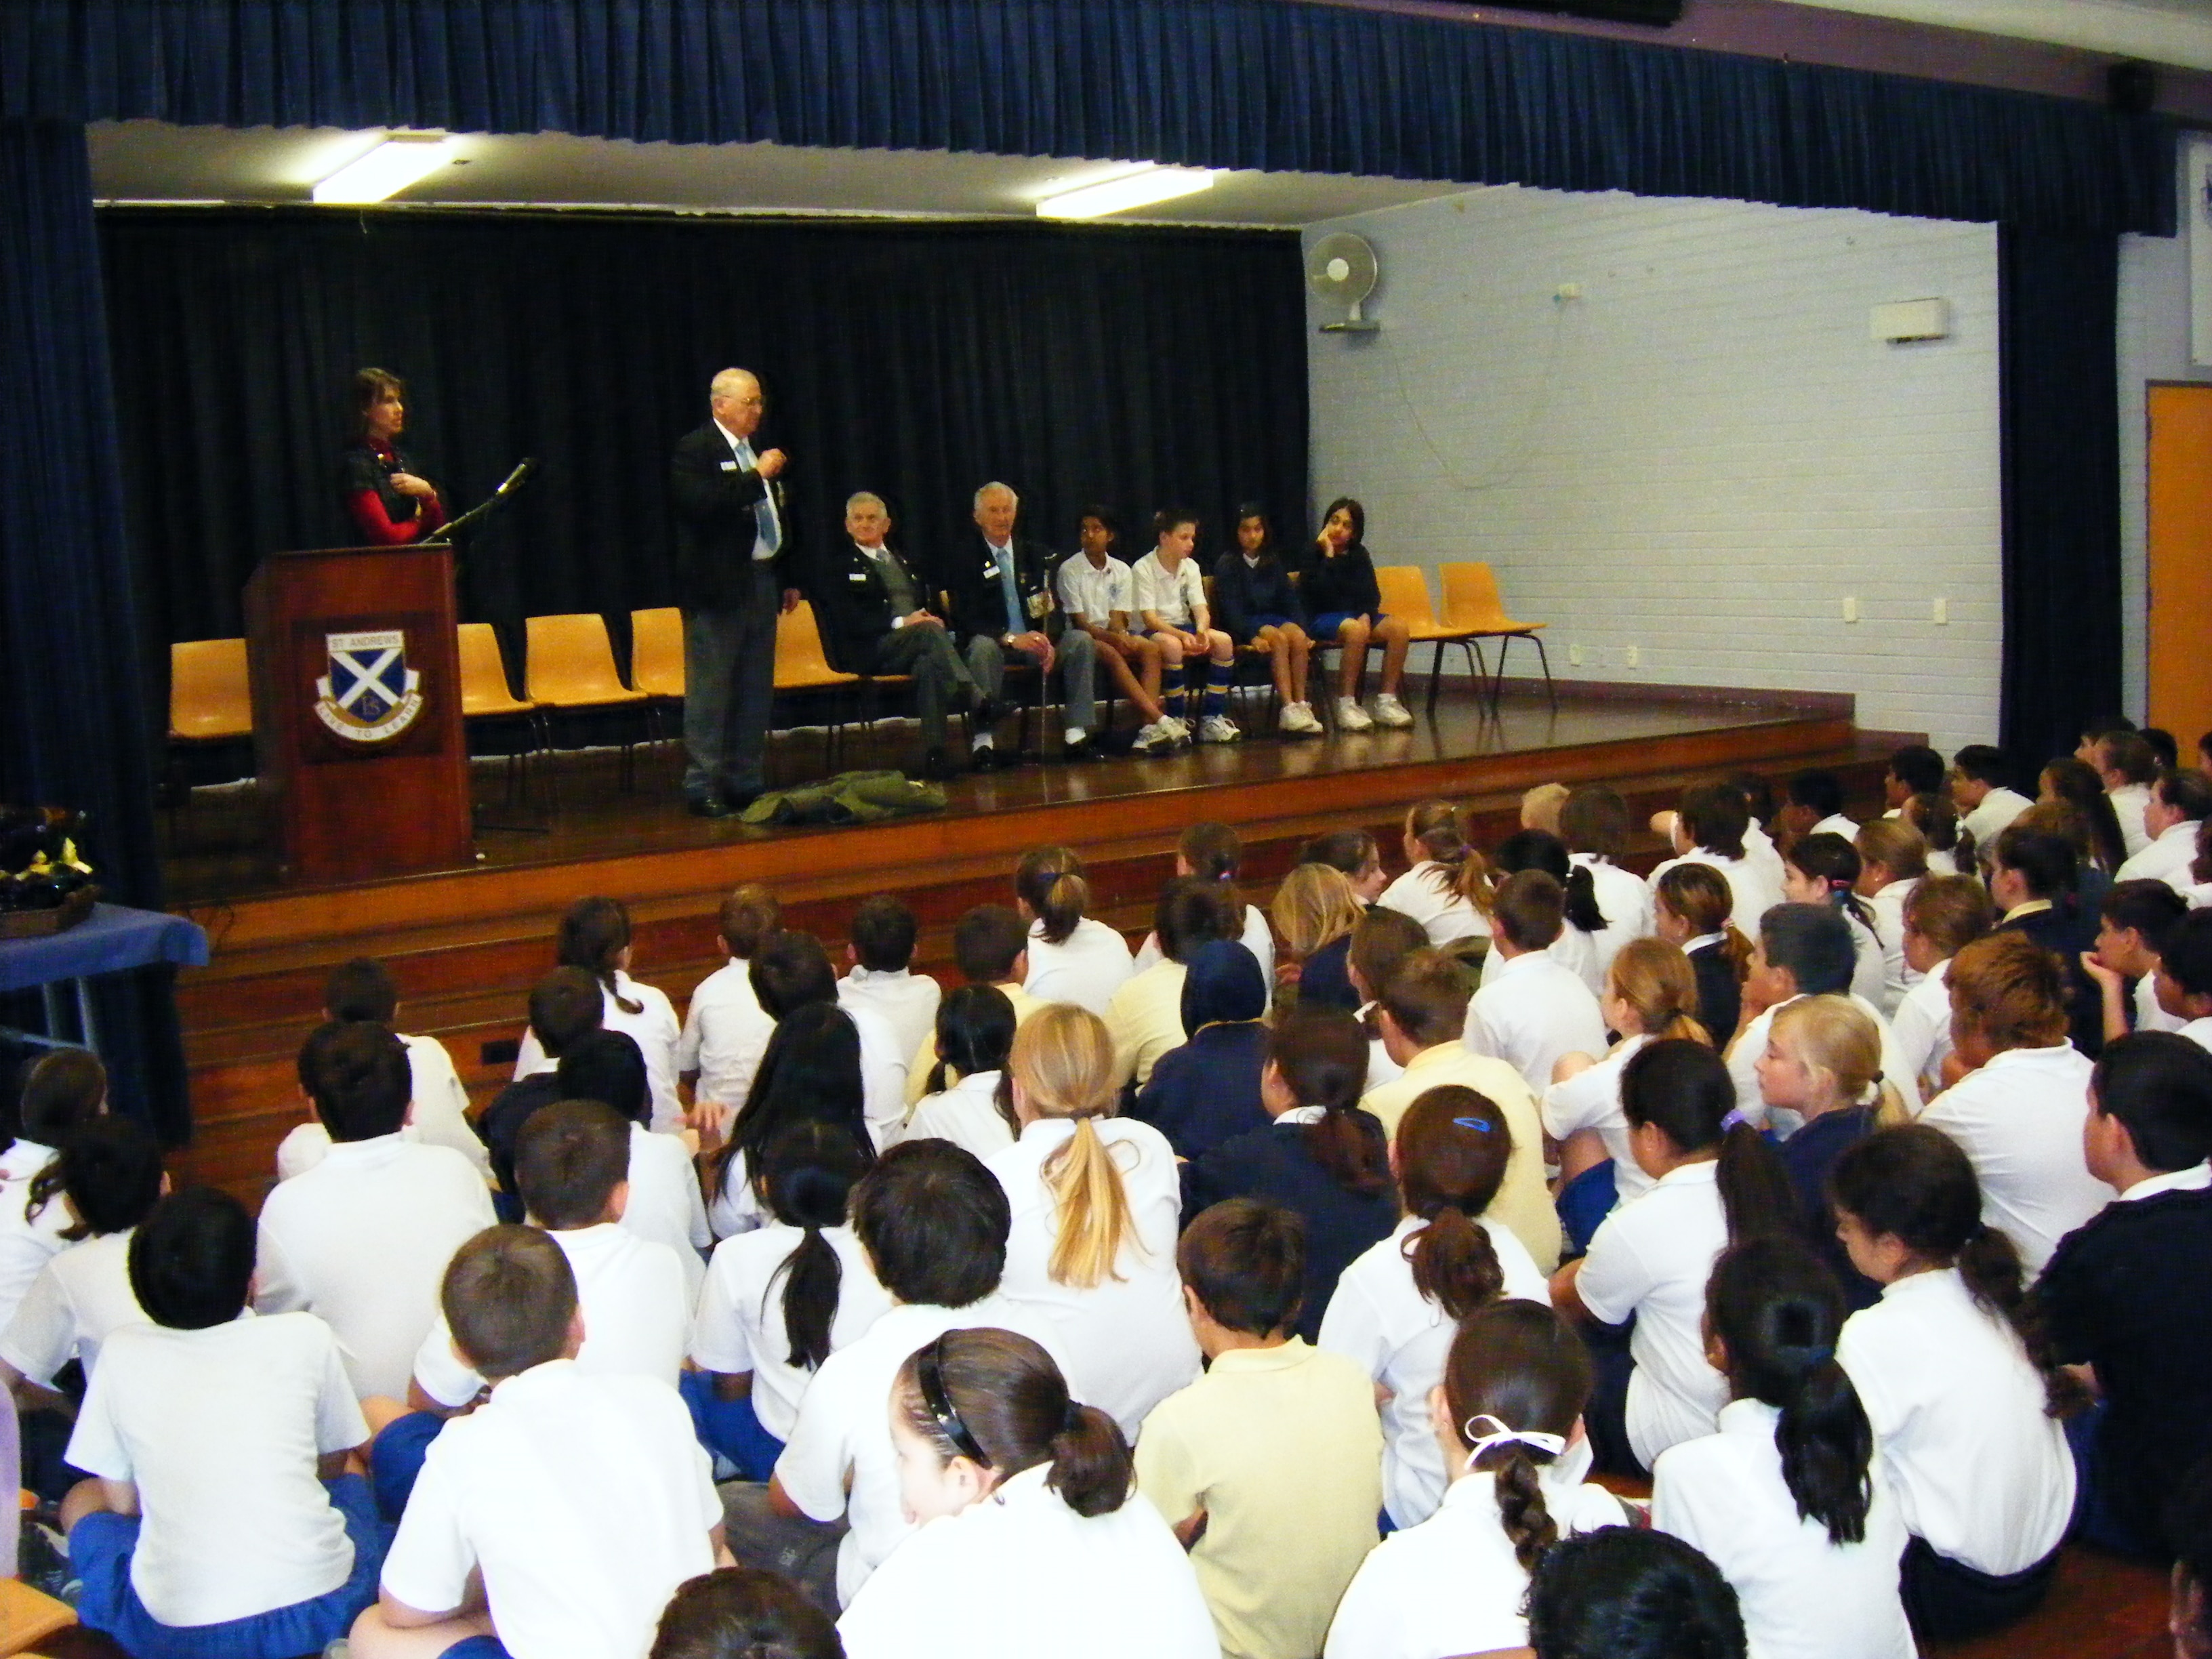 Members of NSW Korean War Veterans Association sharing their war experience with students at St Andrews Public School in 2009.